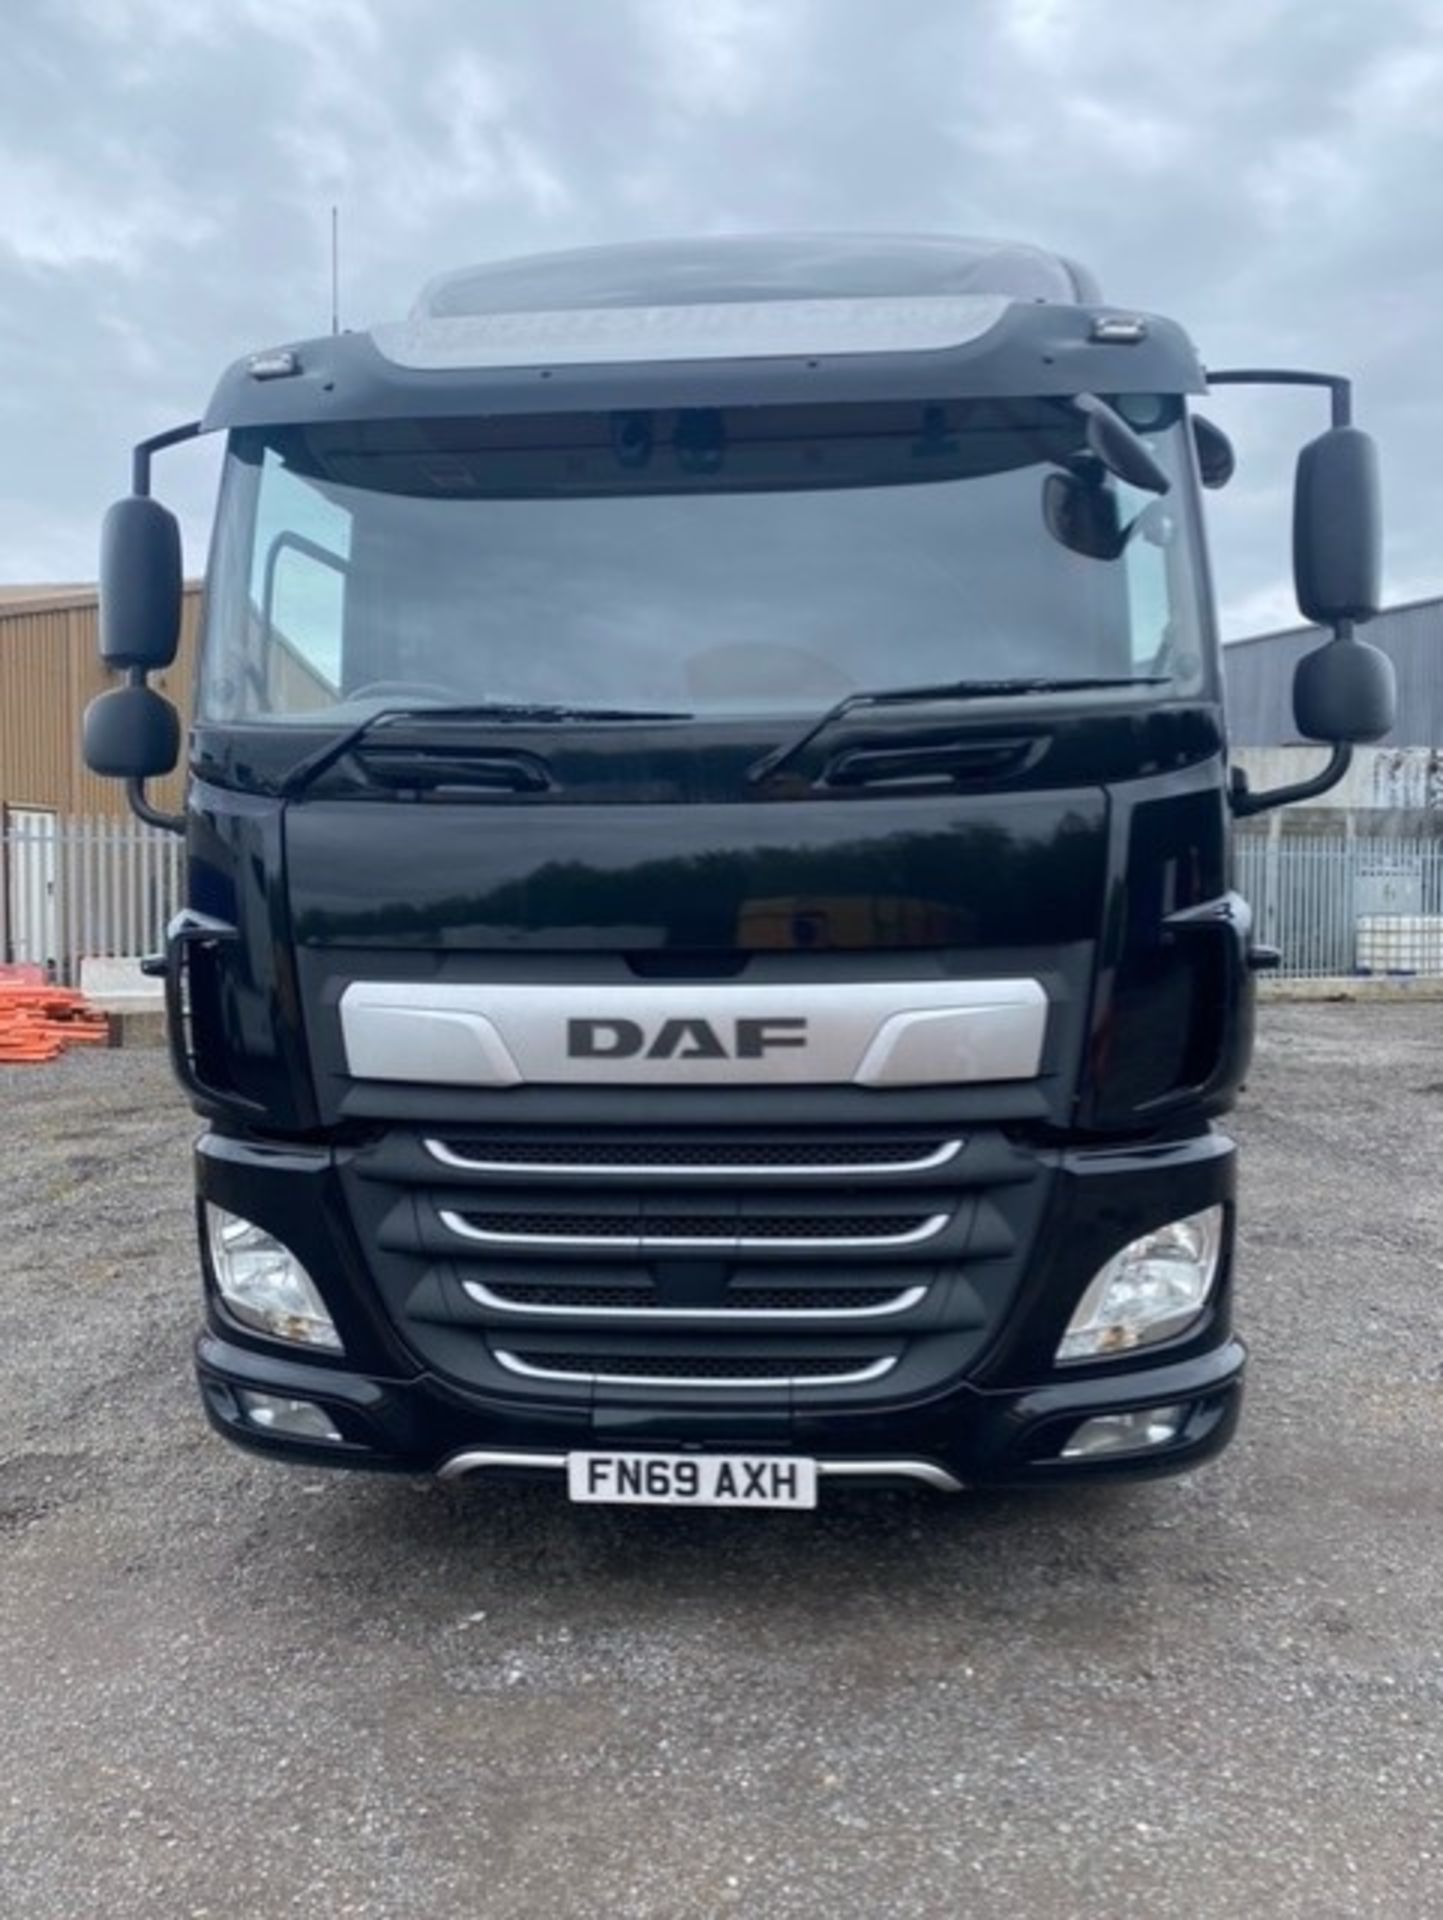 2019, DAF CF 260 FA (Ex-Fleet Owned & Maintained) - FN69 AXH (18 Ton Rigid Truck with Tail Lift) - Bild 17 aus 22